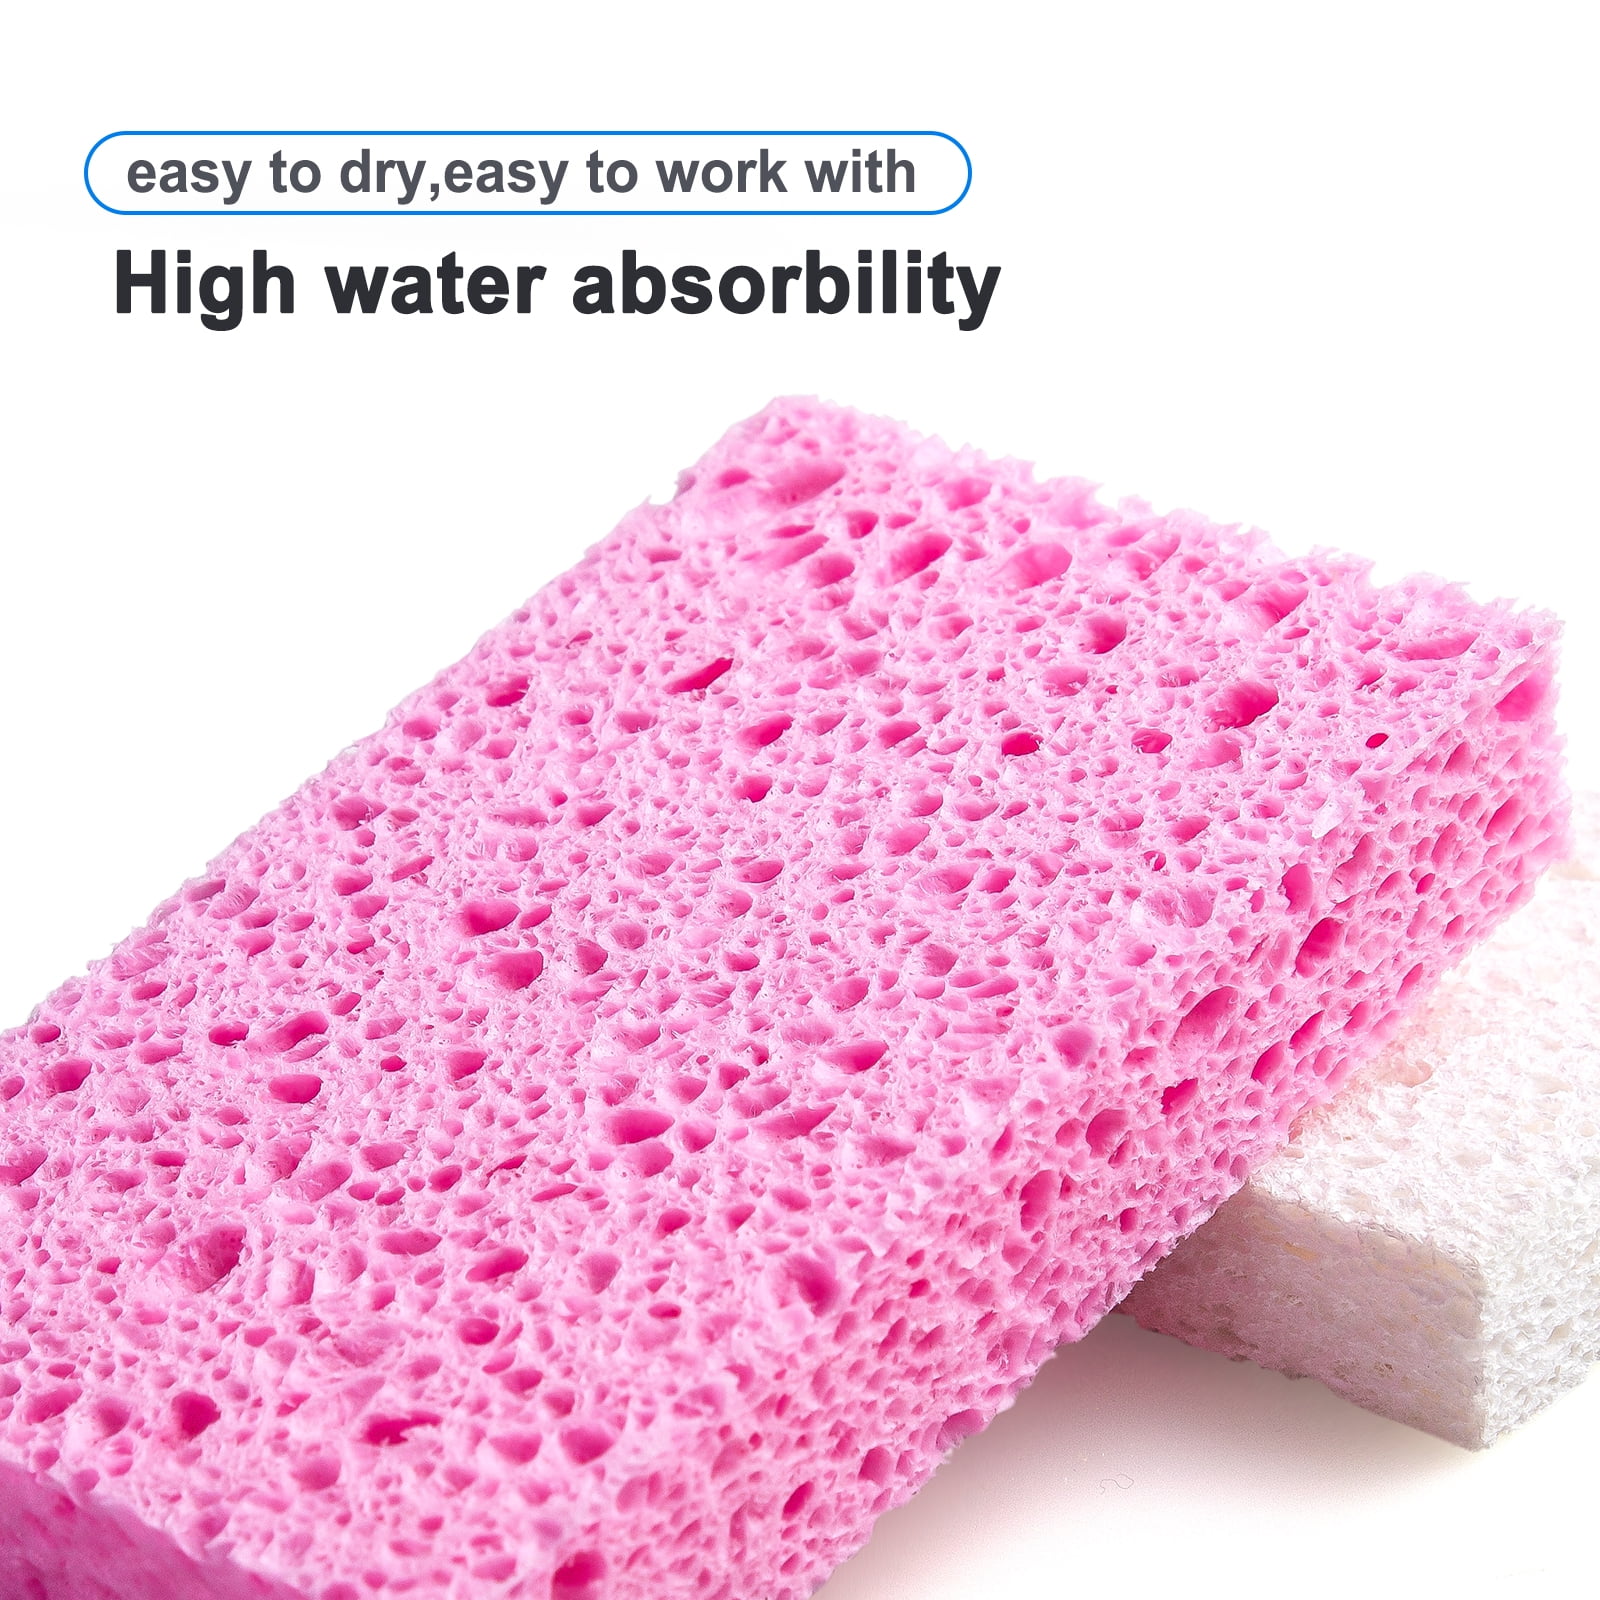 HOMERHYME Non-Scratch Cellulose Scrub Sponges 12 Pack, Kitchen Sponge with  Double-Side & Ergonomic Design. Durable Sponge for Dishes, Coated